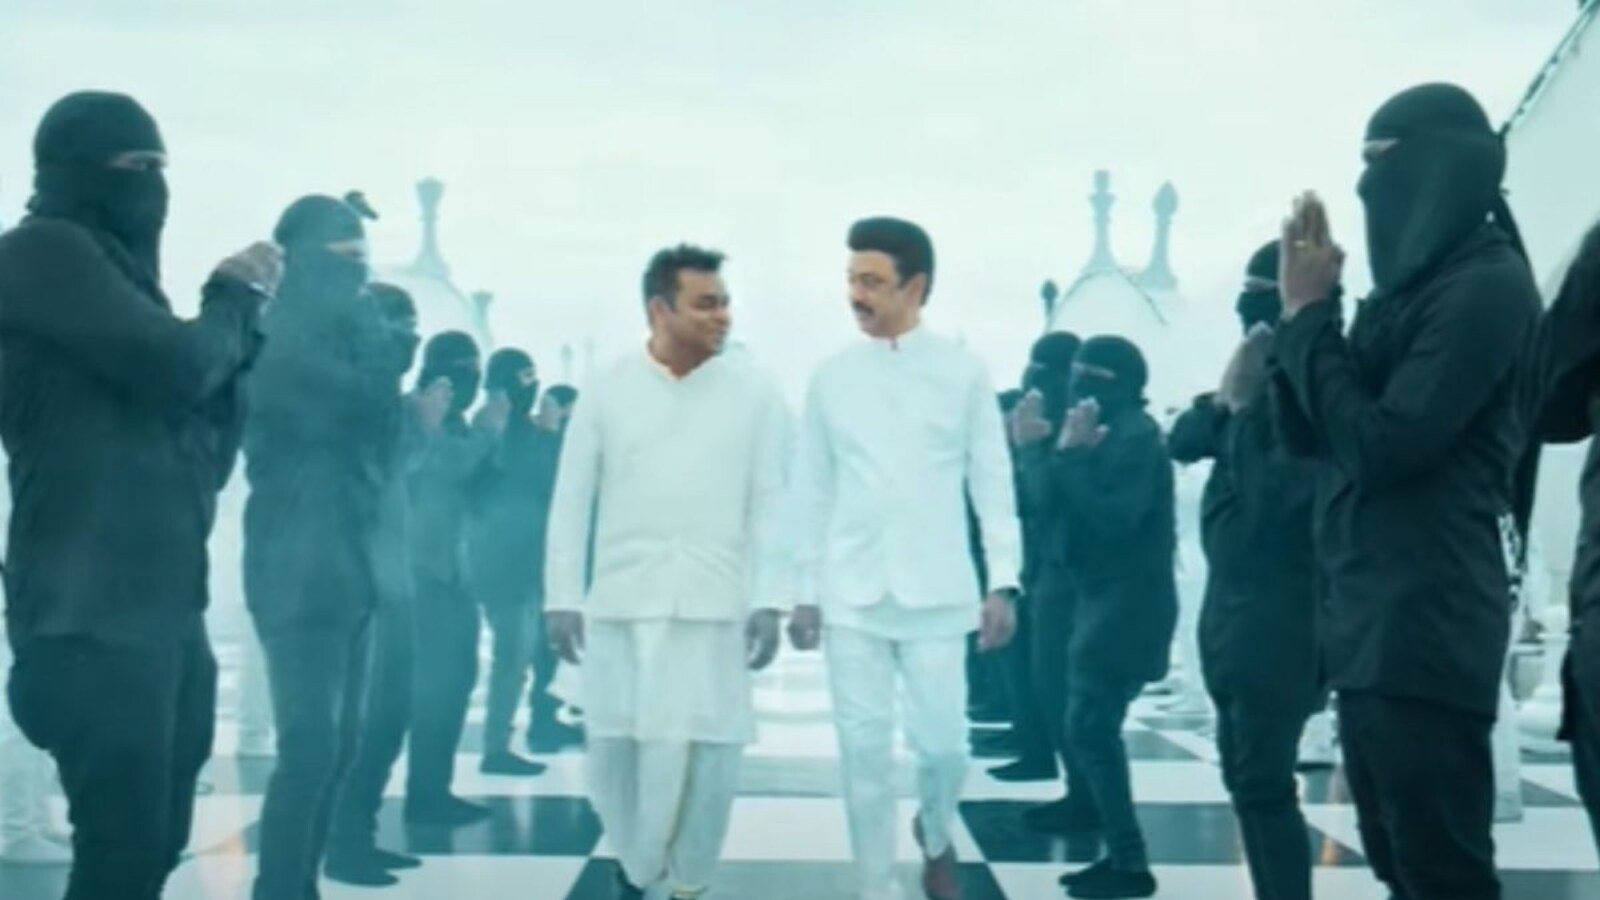 44th Chess Olympiad: Rajnikanth releases teaser featuring AR